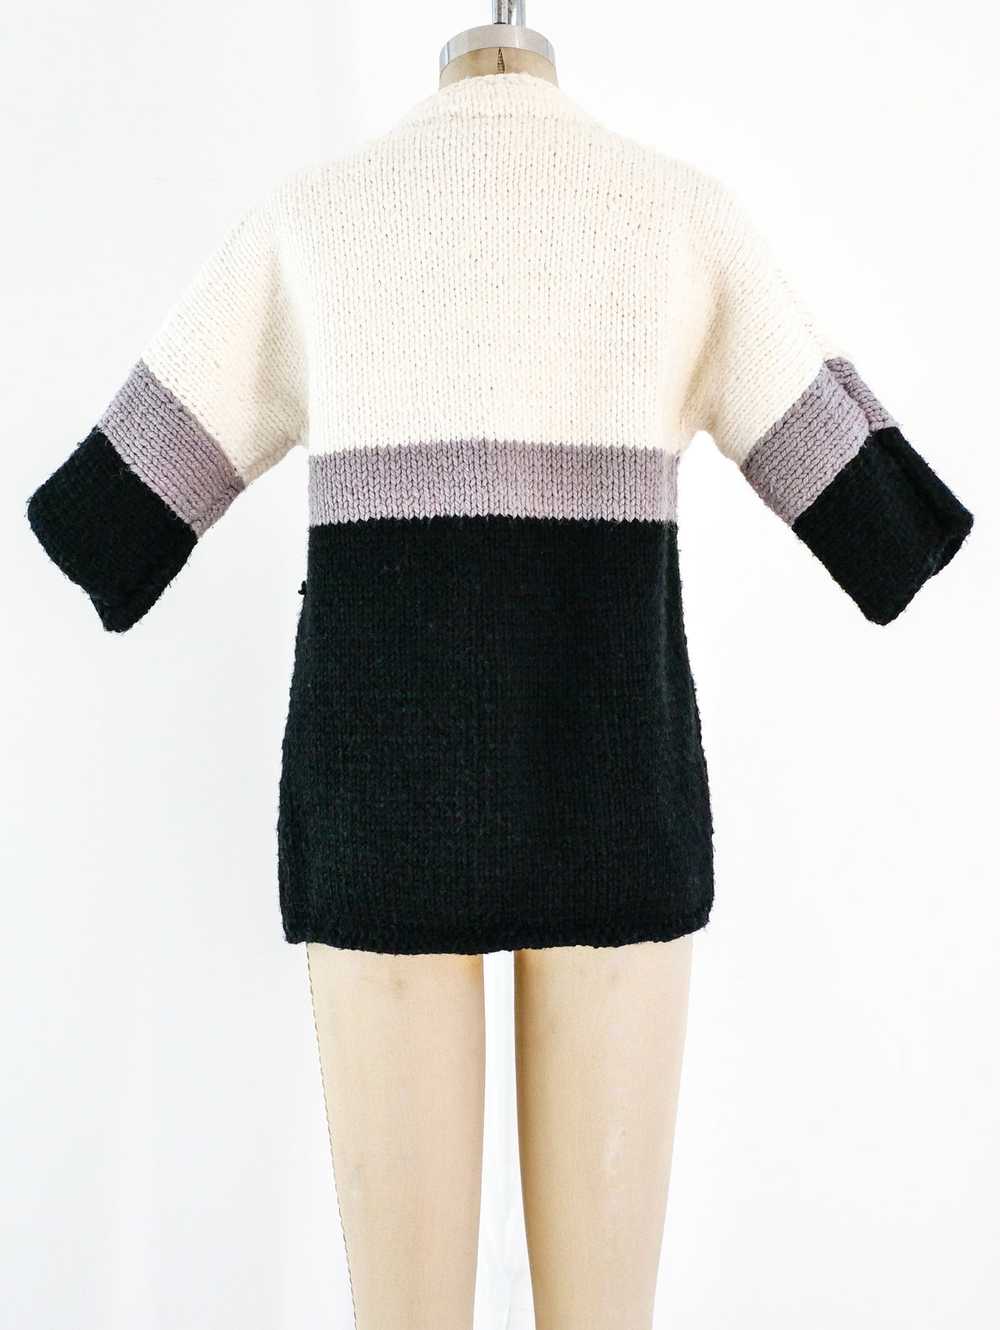 1960s Colorblock Knit Sweater - image 4